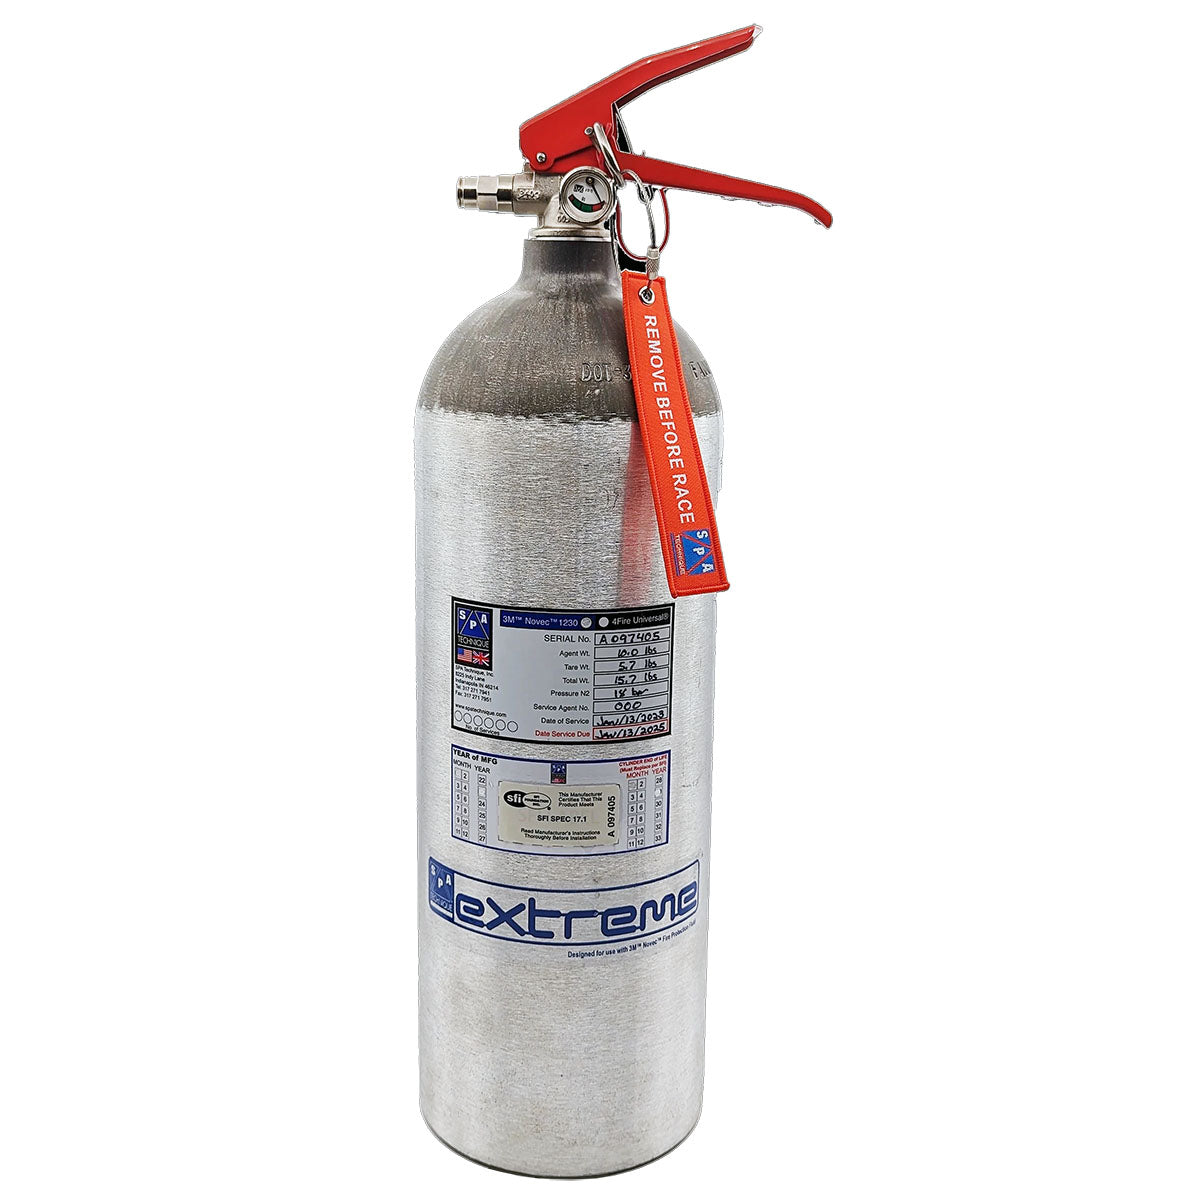 Spa Extreme Novec SFI Fire System 10lb Fire Suppression system for race car